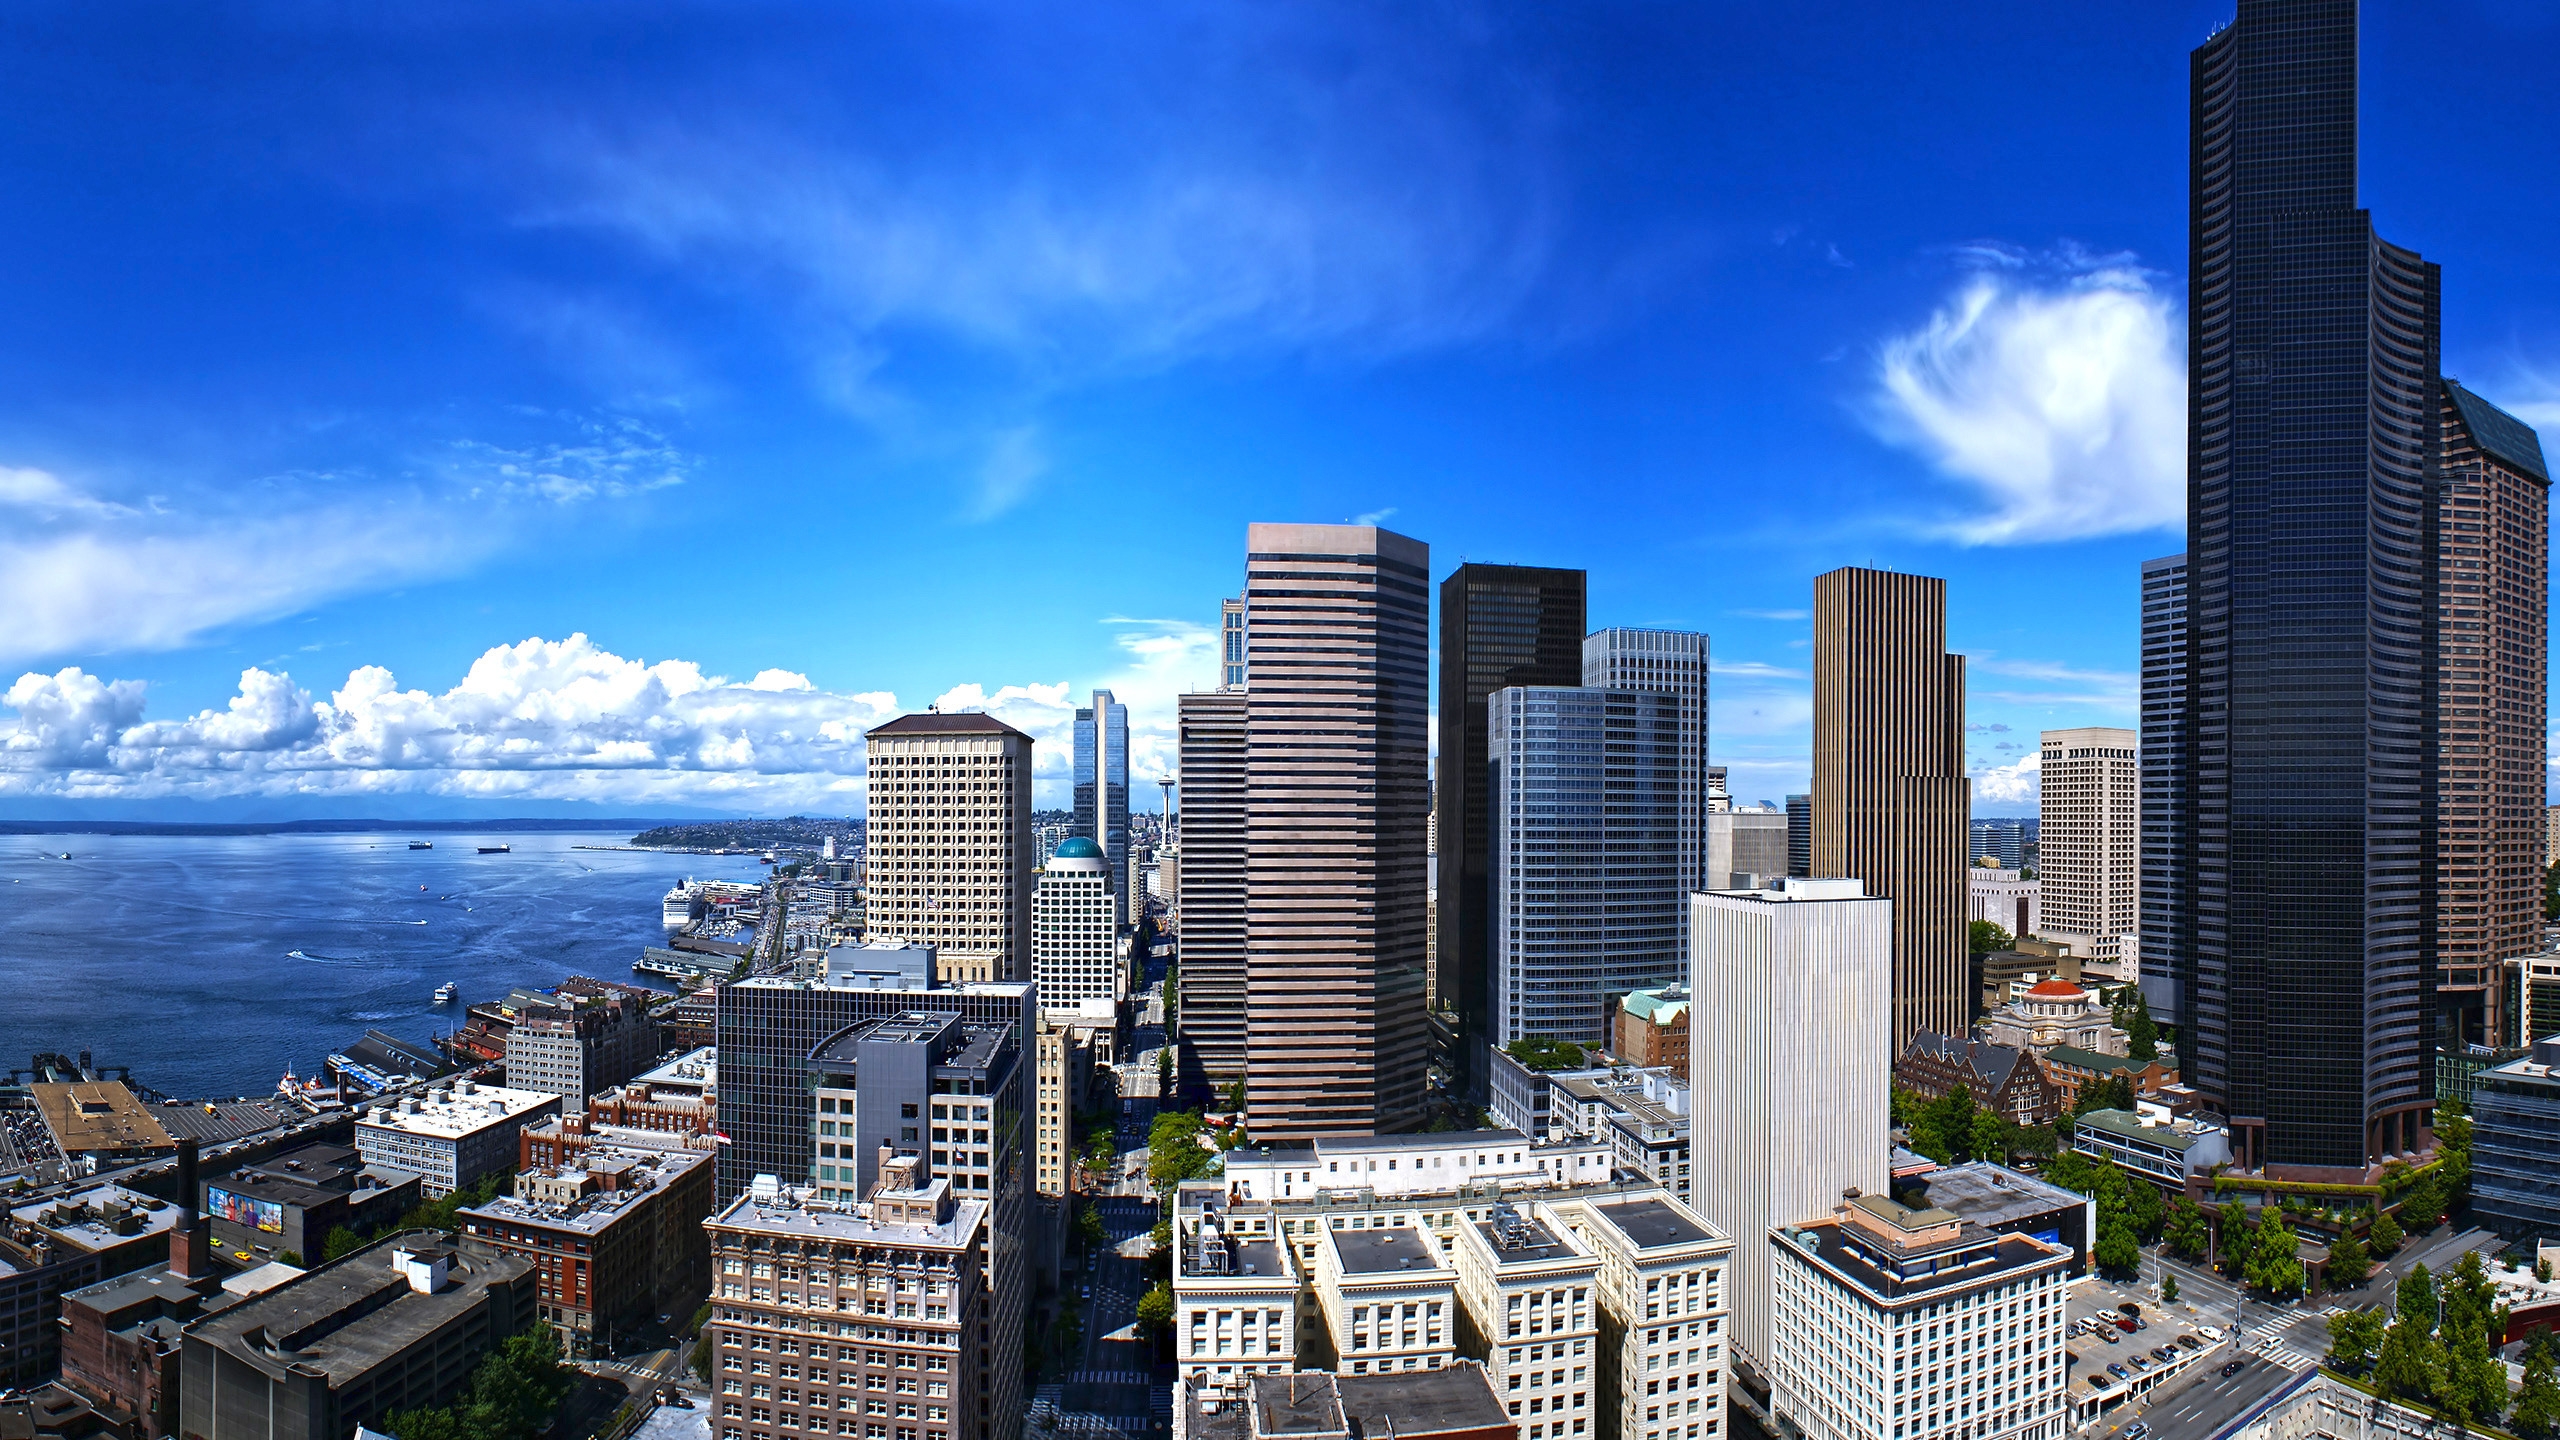 Seattle Town for 2560x1440 HDTV resolution